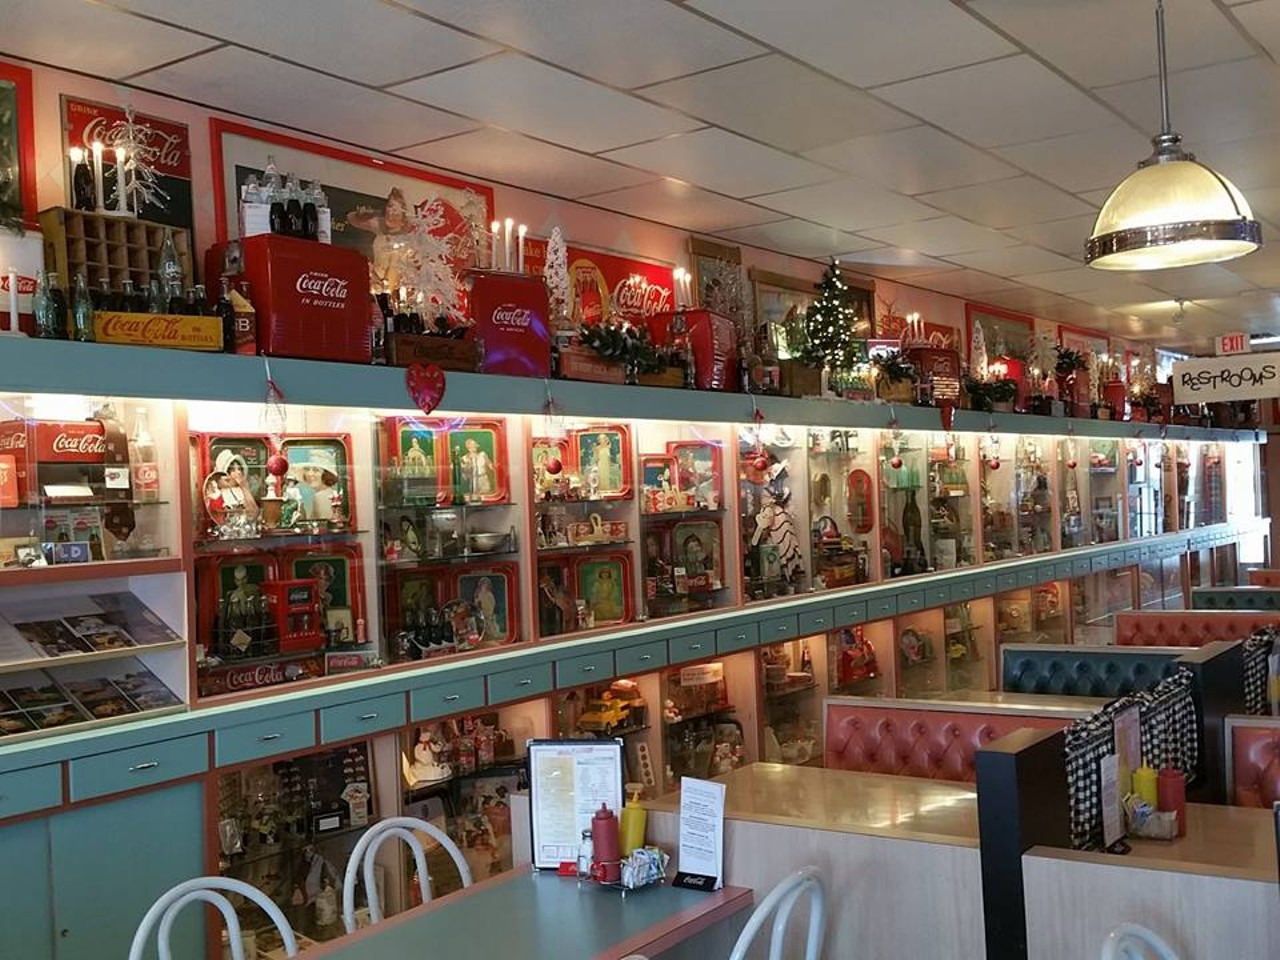  Dawson & Steven&#146;s Classic 50&#146;s Diner
Grayling, MI
The combination of a museum and diner features Michigan&#146;s largest collection of Coca-Cola memorabilia. The museum/diner is also known for it&#146;s 50s style interior.
Photo via Facebook: Dawson & Stevens Classic Diner